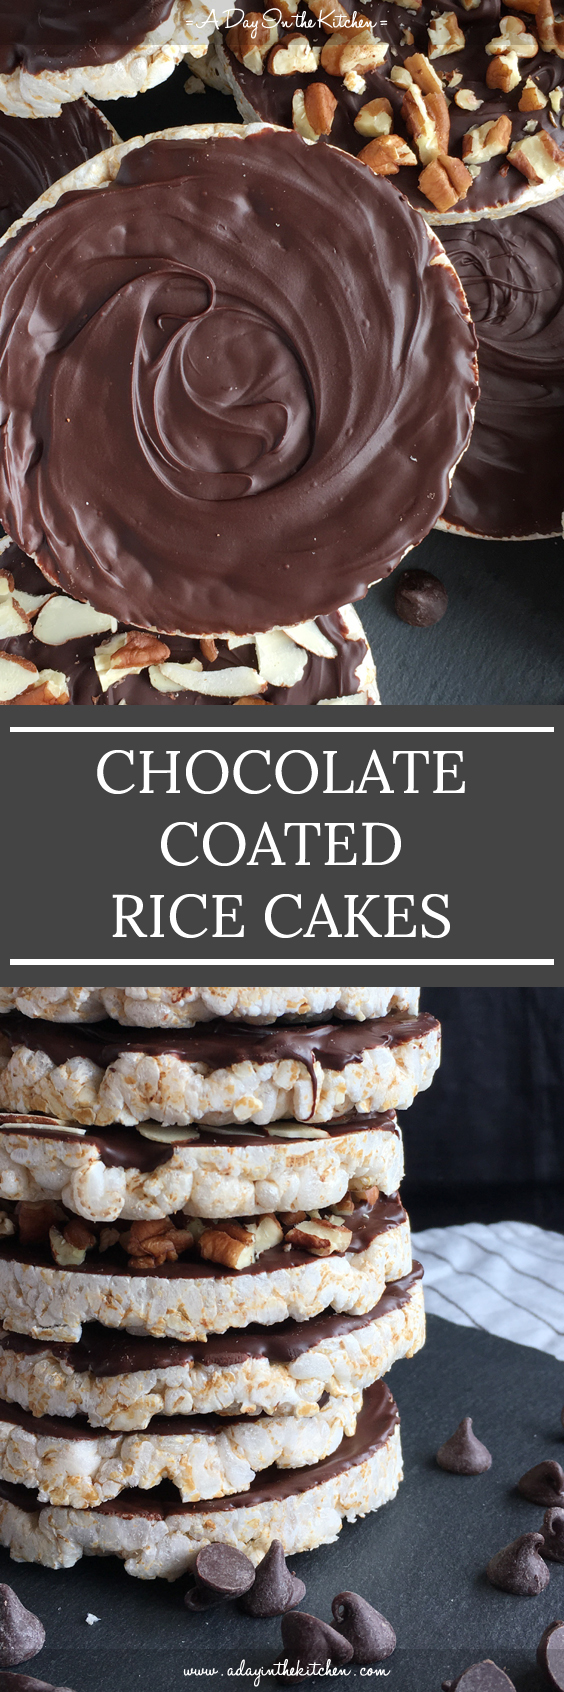 Chocolate Coated Rice Cakes | A Day in the Kitchen